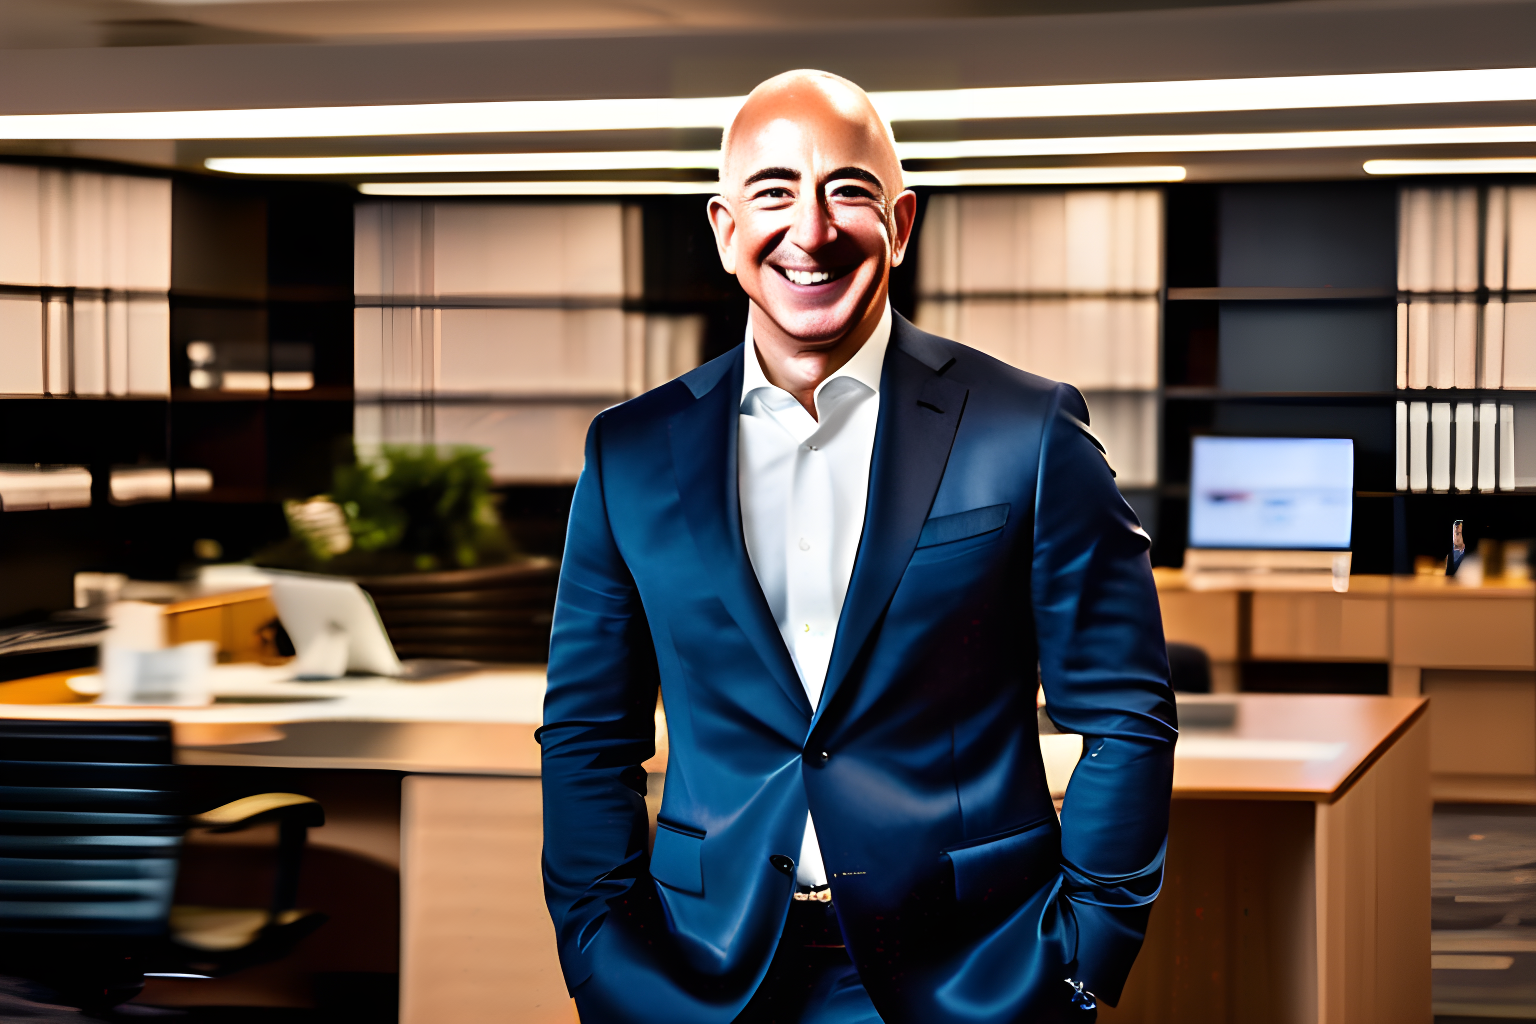 evil jeff bezos laughing in his office